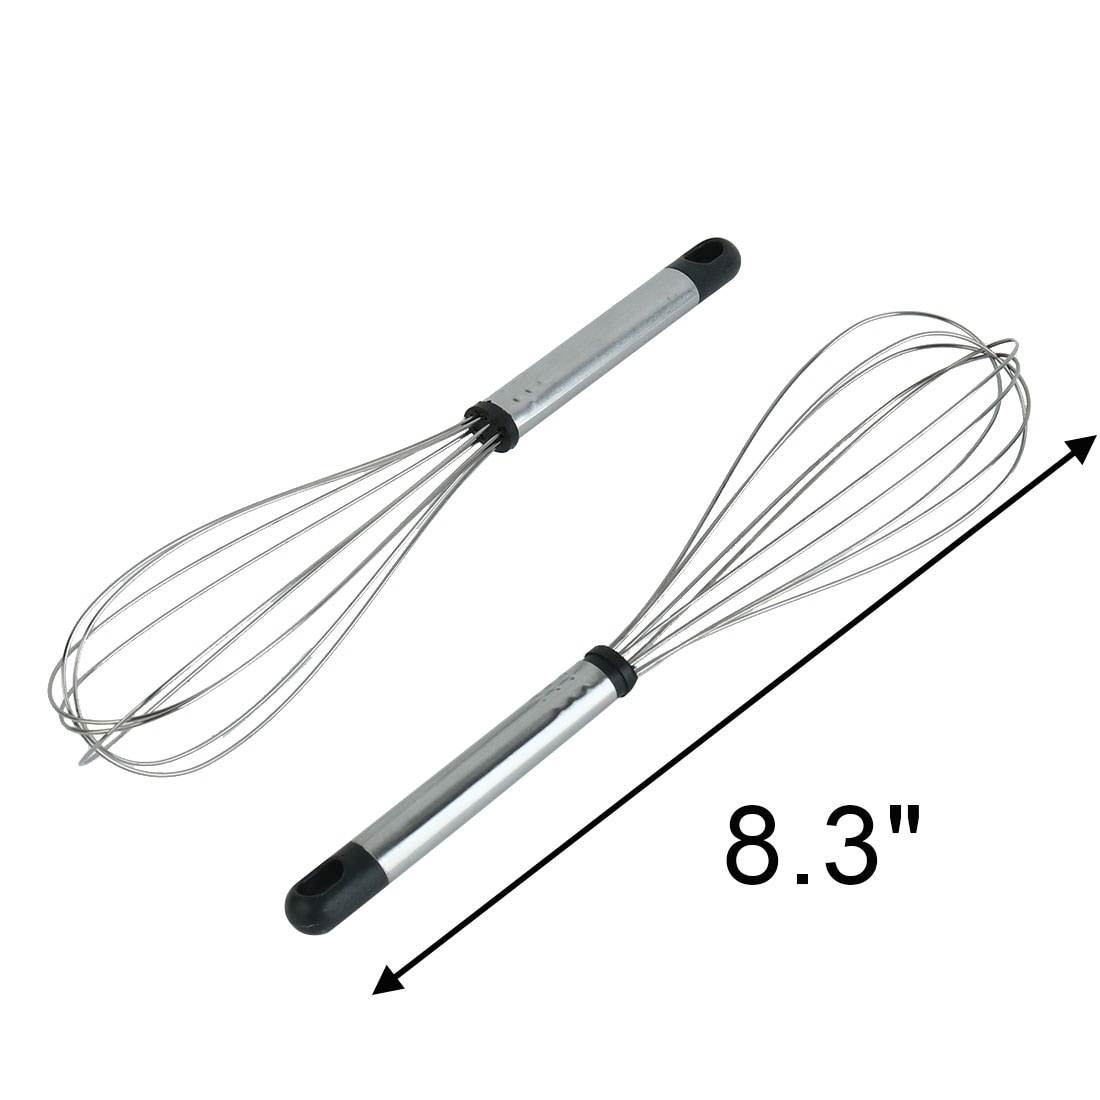 Stainless Steel Rotary Hand Whip Whisk, Egg Beater Mixer, Cooking Tool,  Kitchen Gadget, Classic Hand Crank Style Egg Beater(White)